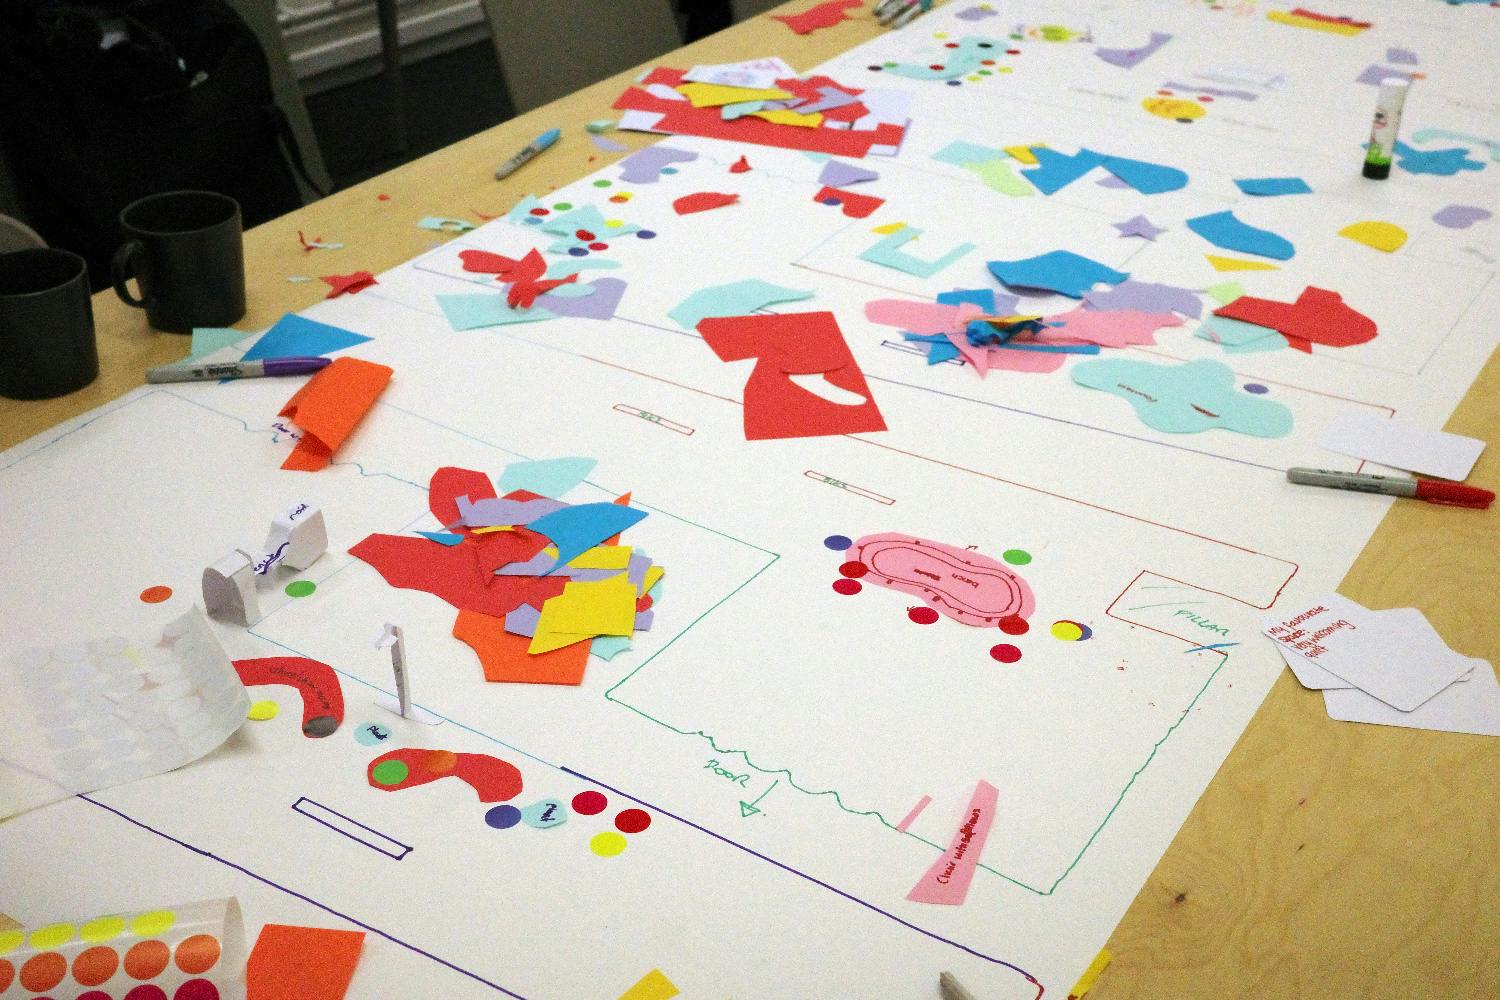 A photo of diagrammatic collage from our first workshop